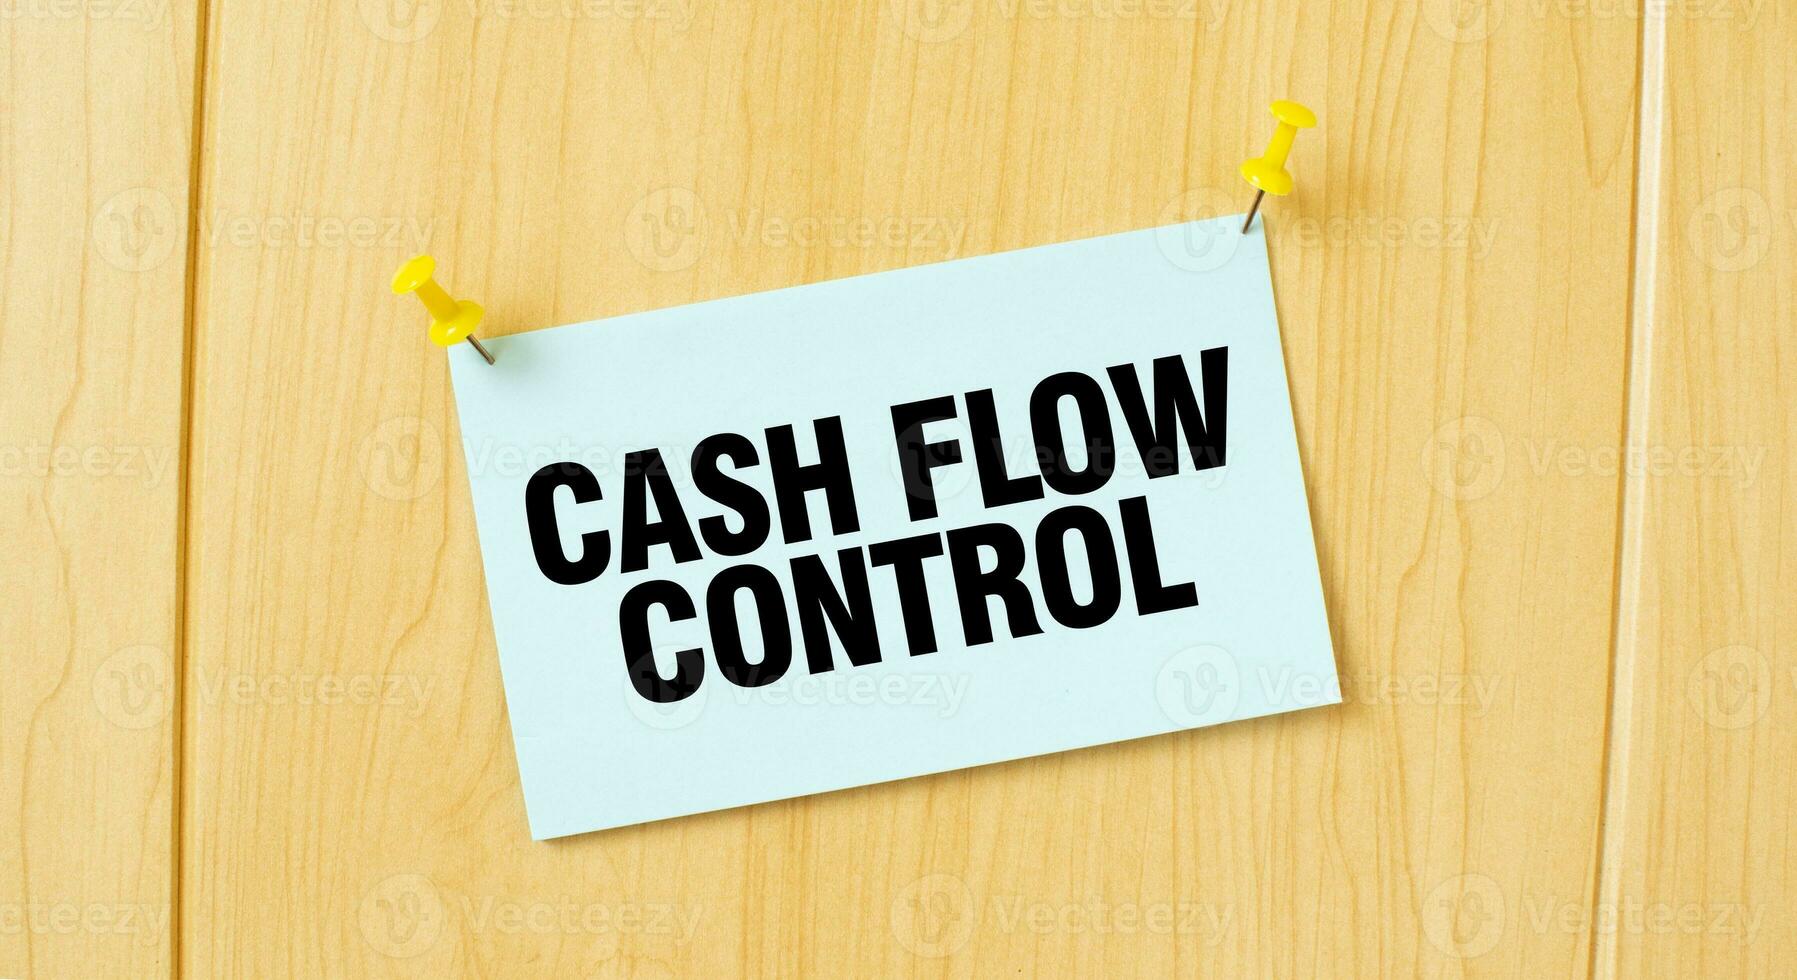 CASH FLOW CONTROL sign written on sticky note pinned on wooden wall photo